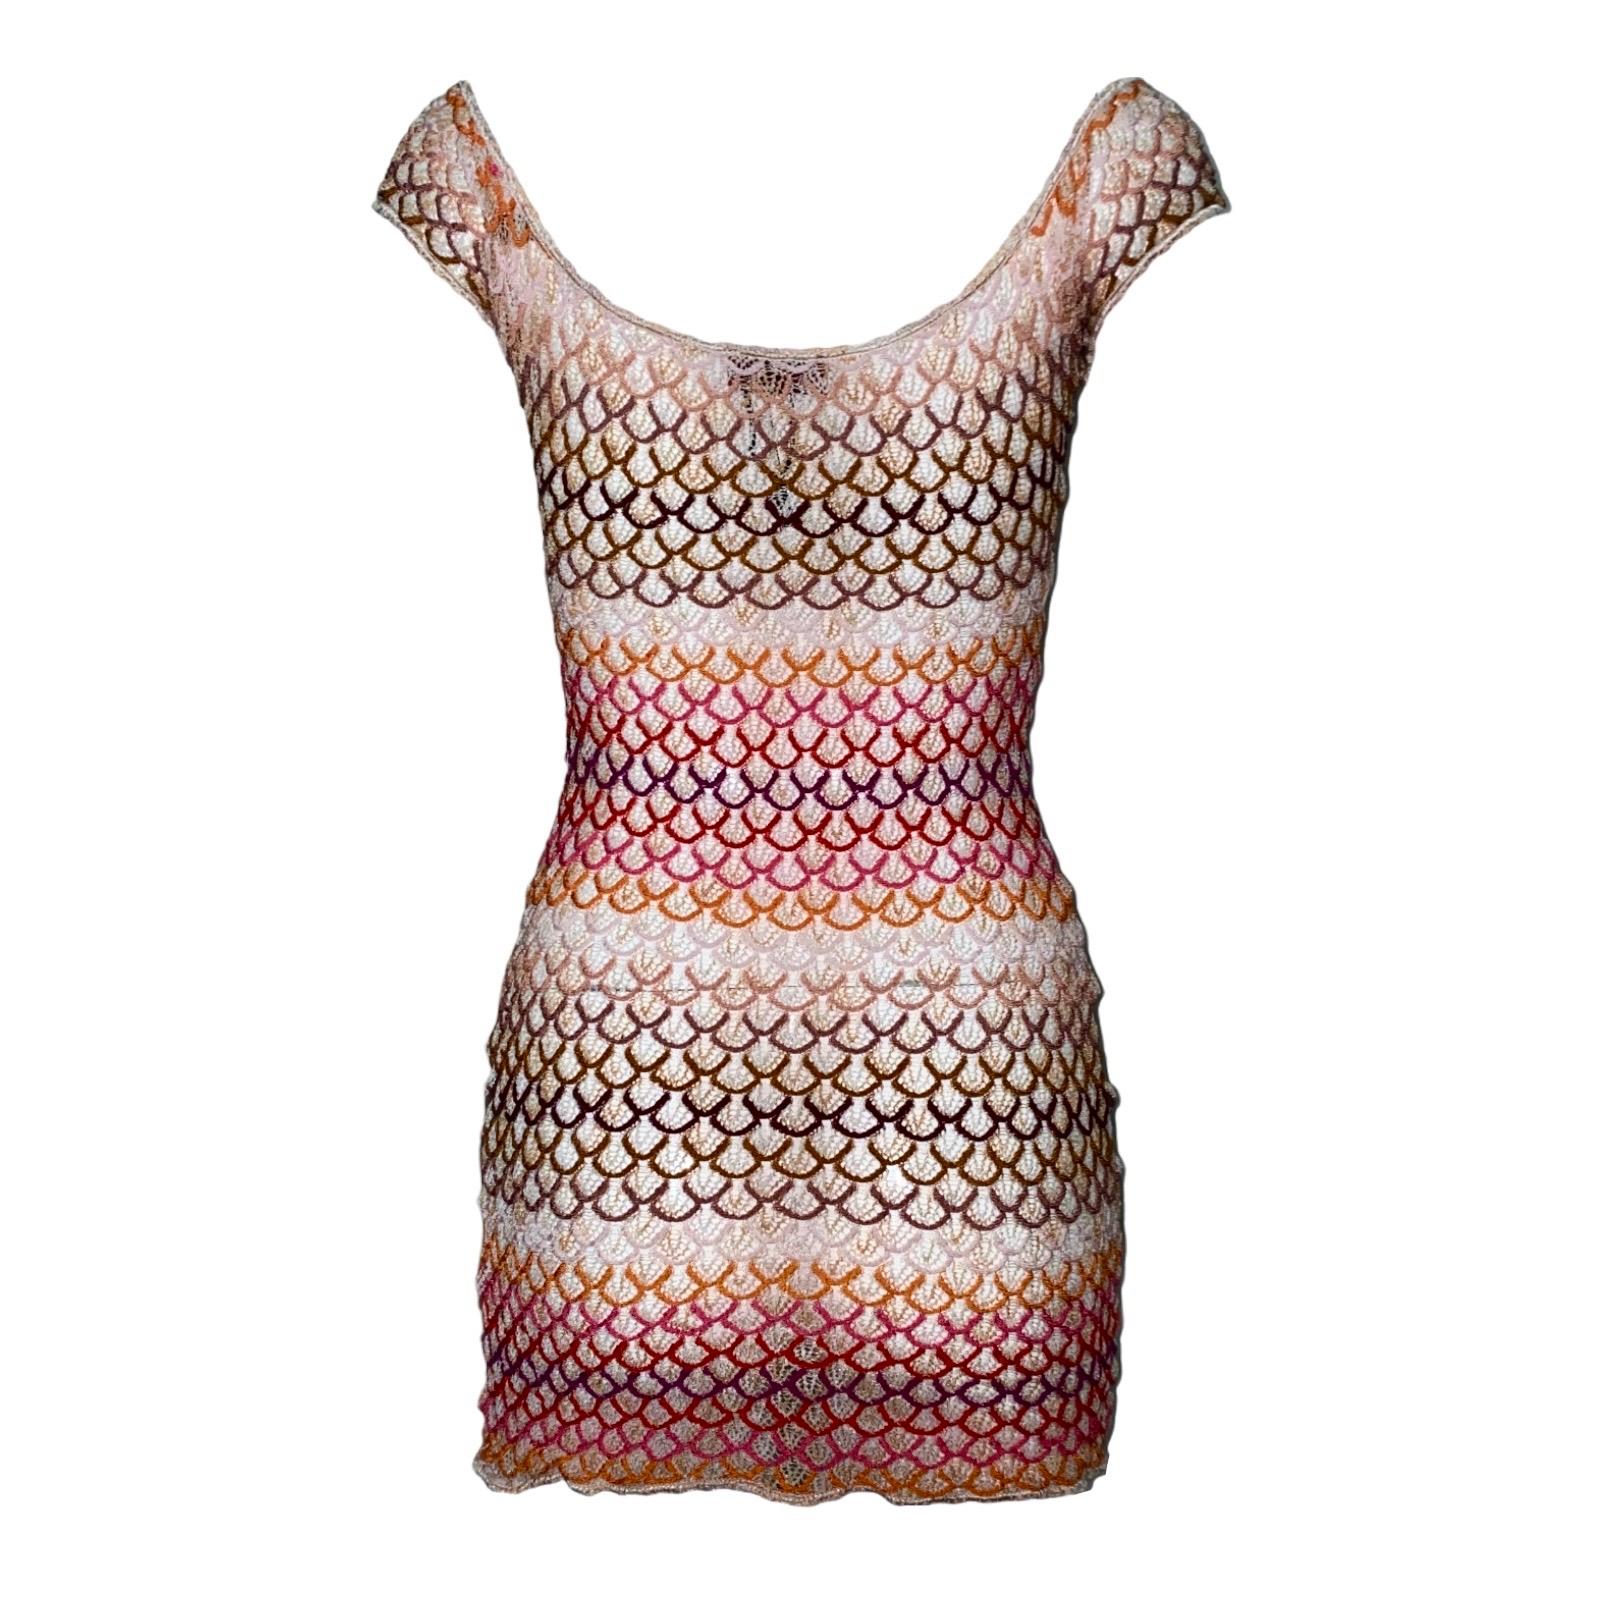 A signature Missoni knit dress in a rainbow of colors is the only dress you'll need this Resort season

Missoni's multicolored mini dress is an effortless way to wear the brand's signature crochet knit. Slip this body-skimming coverup over your